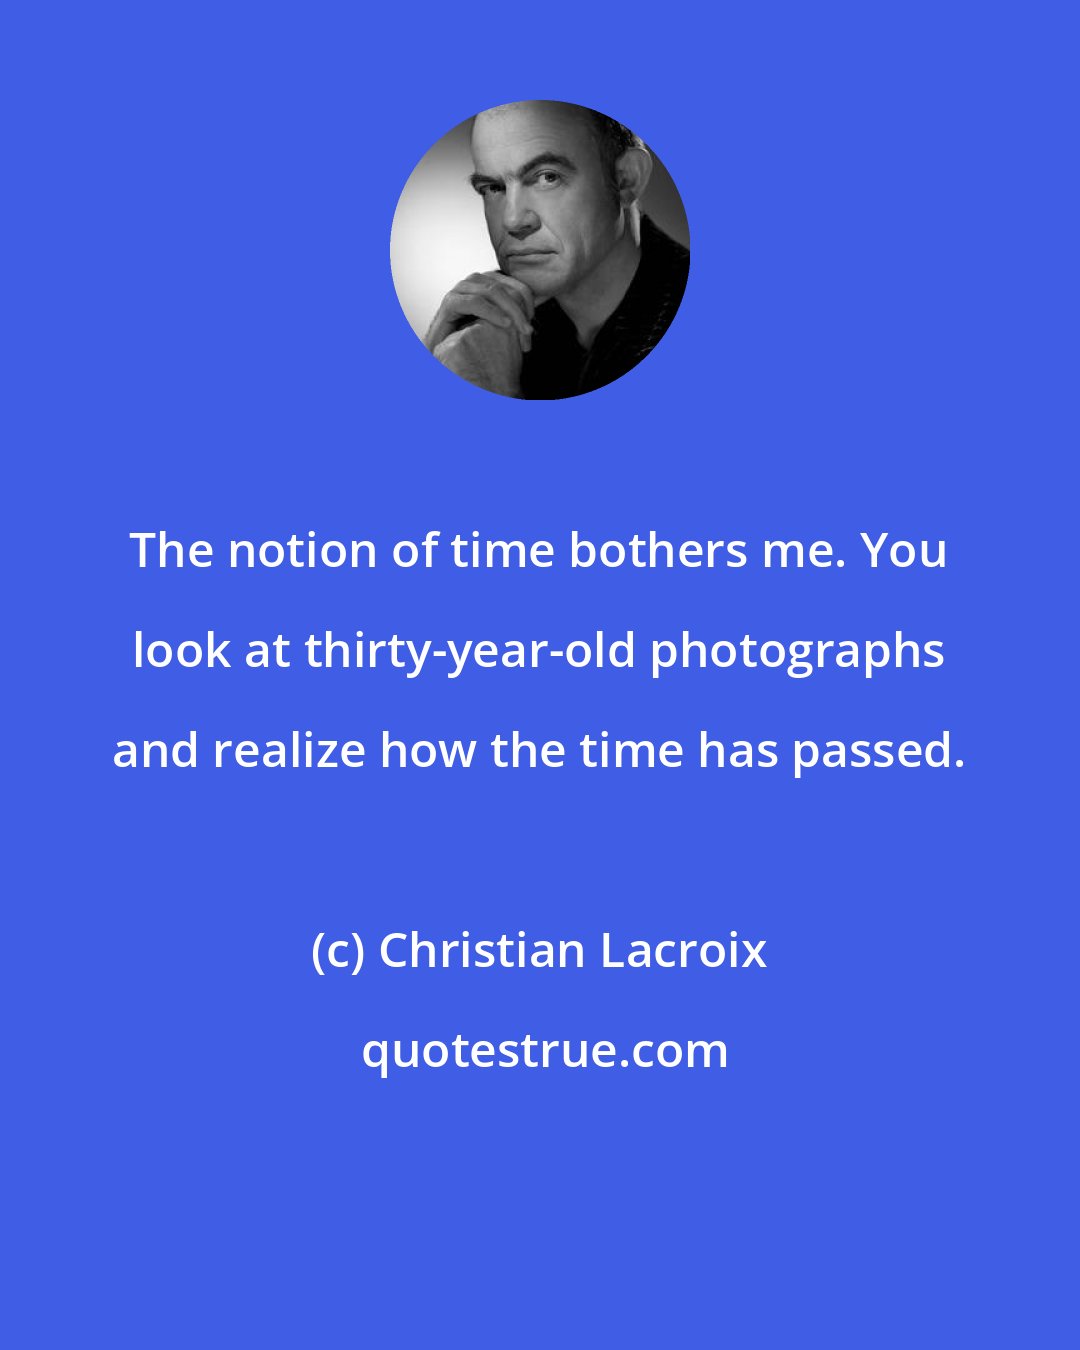 Christian Lacroix: The notion of time bothers me. You look at thirty-year-old photographs and realize how the time has passed.